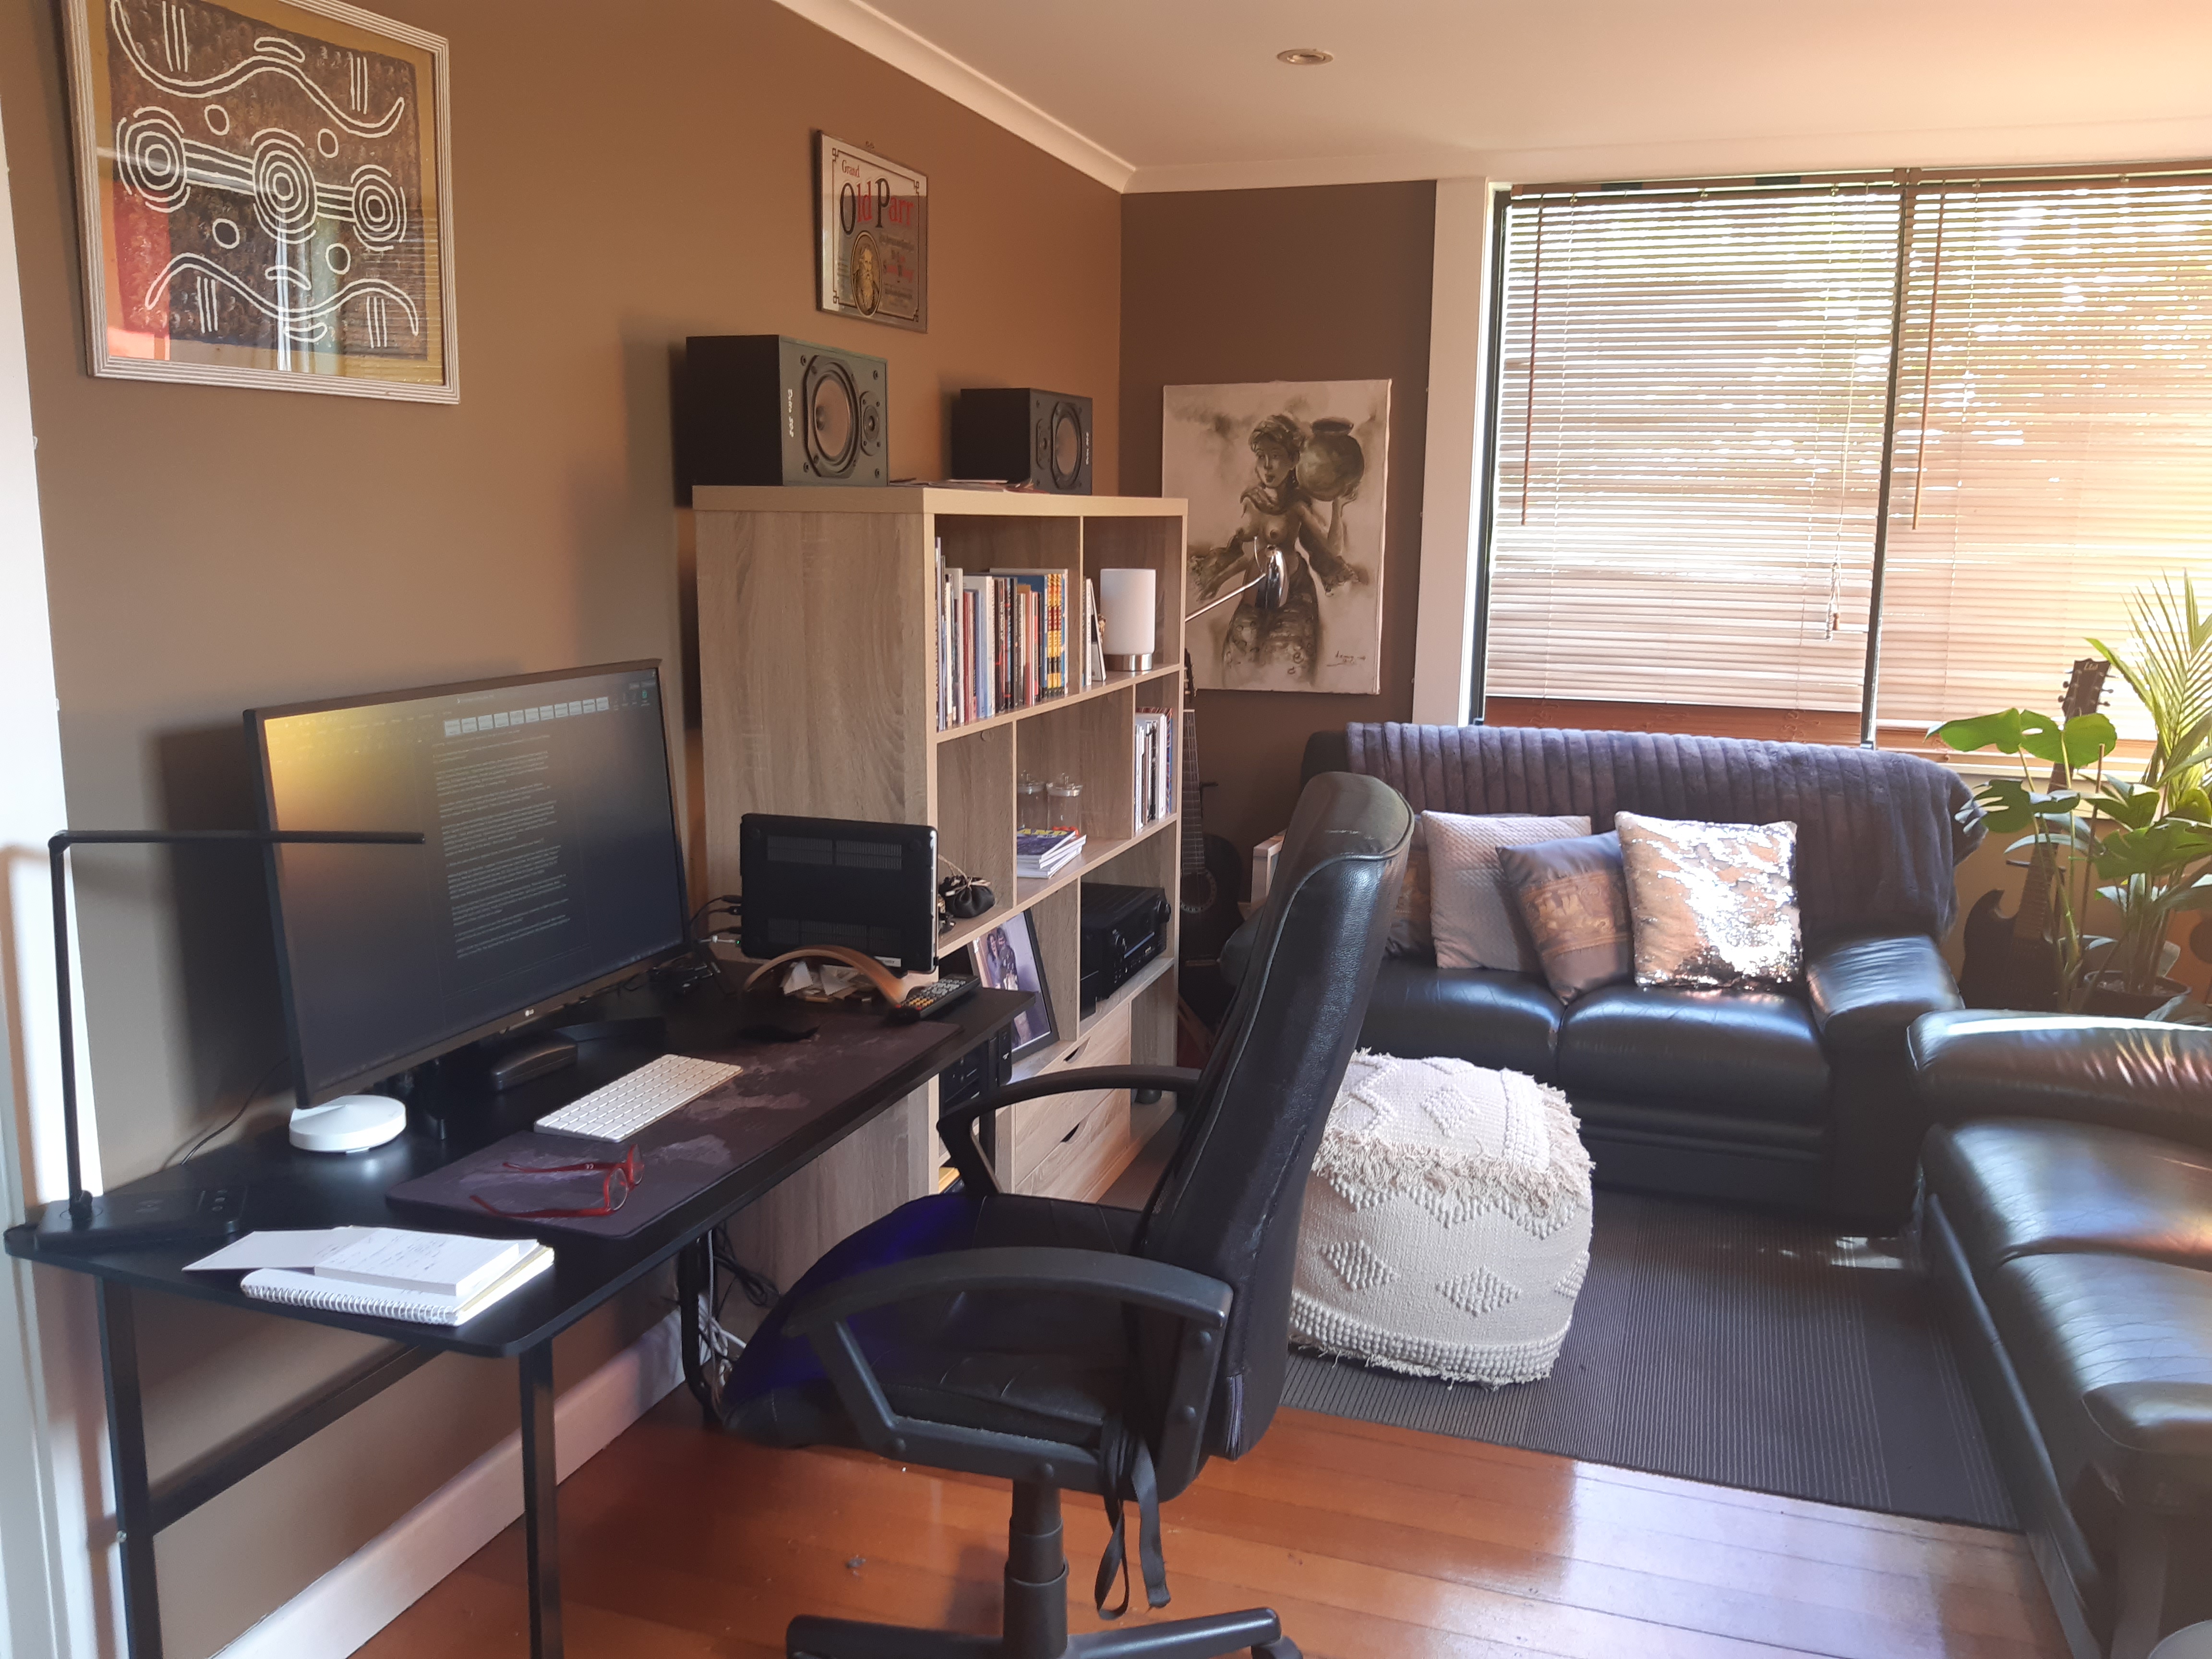 An image of a home office with a black desk and chair, a big computer monitor, and couches, bookshelves and cushions around it.